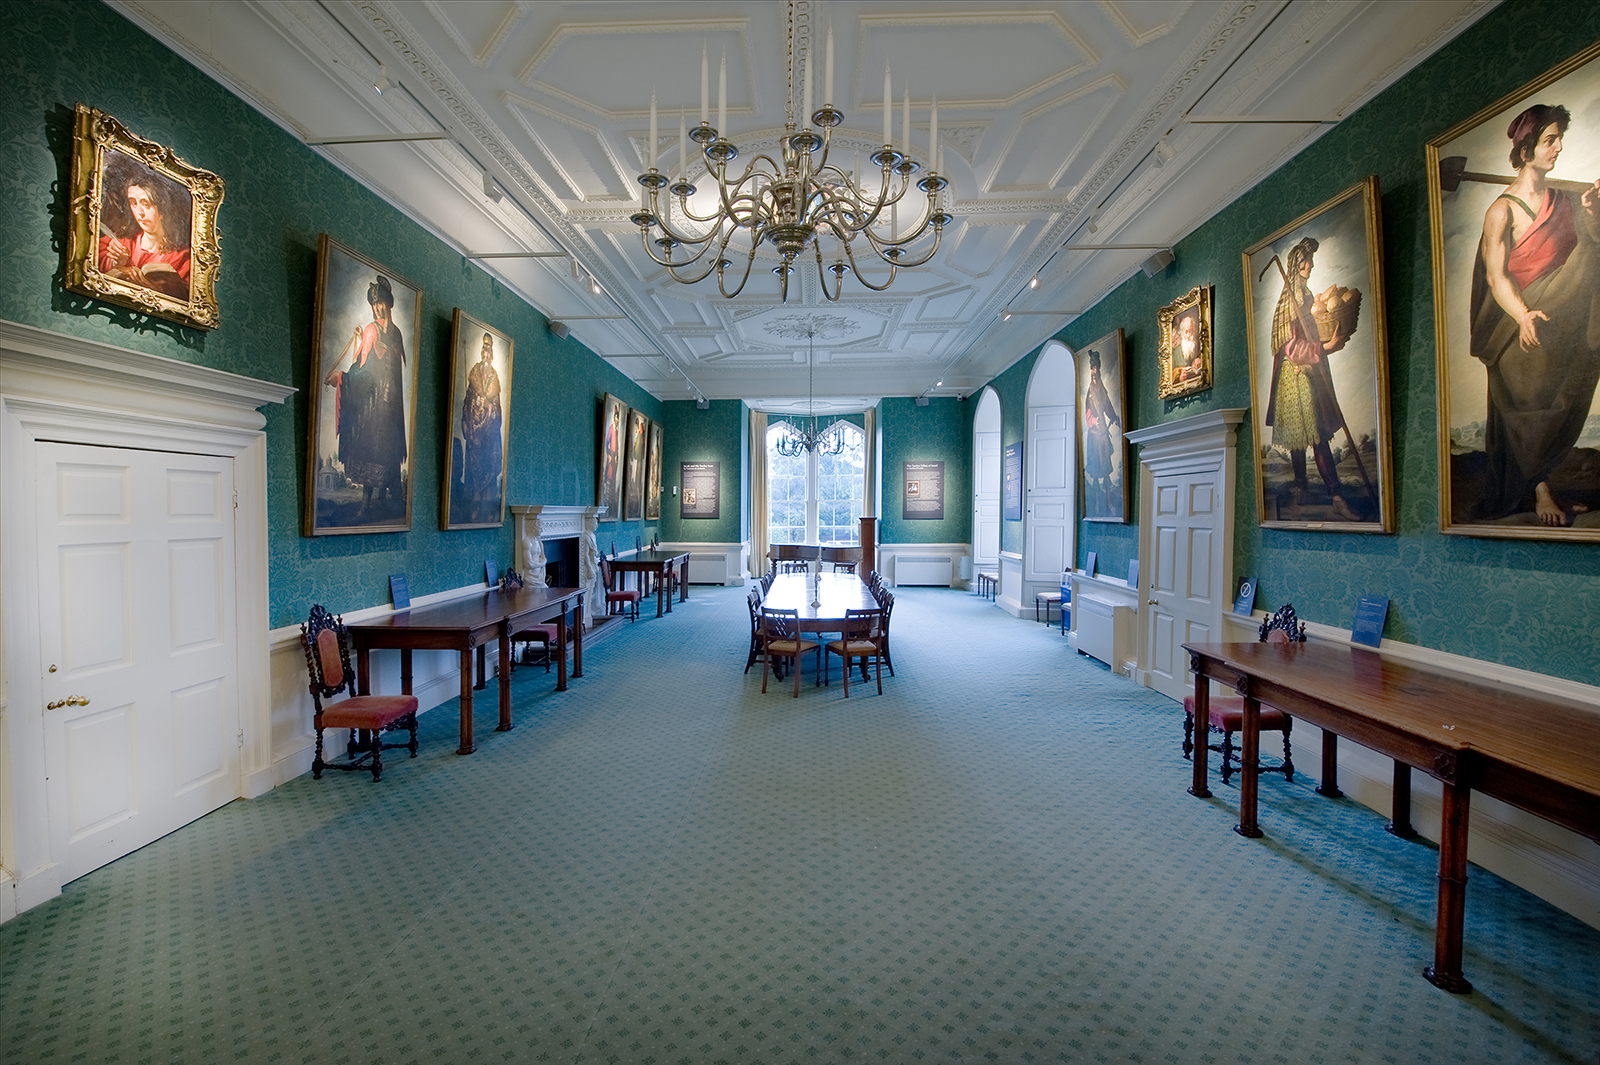 The Auckland Castle Long Dining Room in 2015, prior toconservation, showing Jacob and His Twelve Sons portraits by Spanish master Francisco de Zurbarán. Photo © Colin Davison, courtesy The Auckland Project.